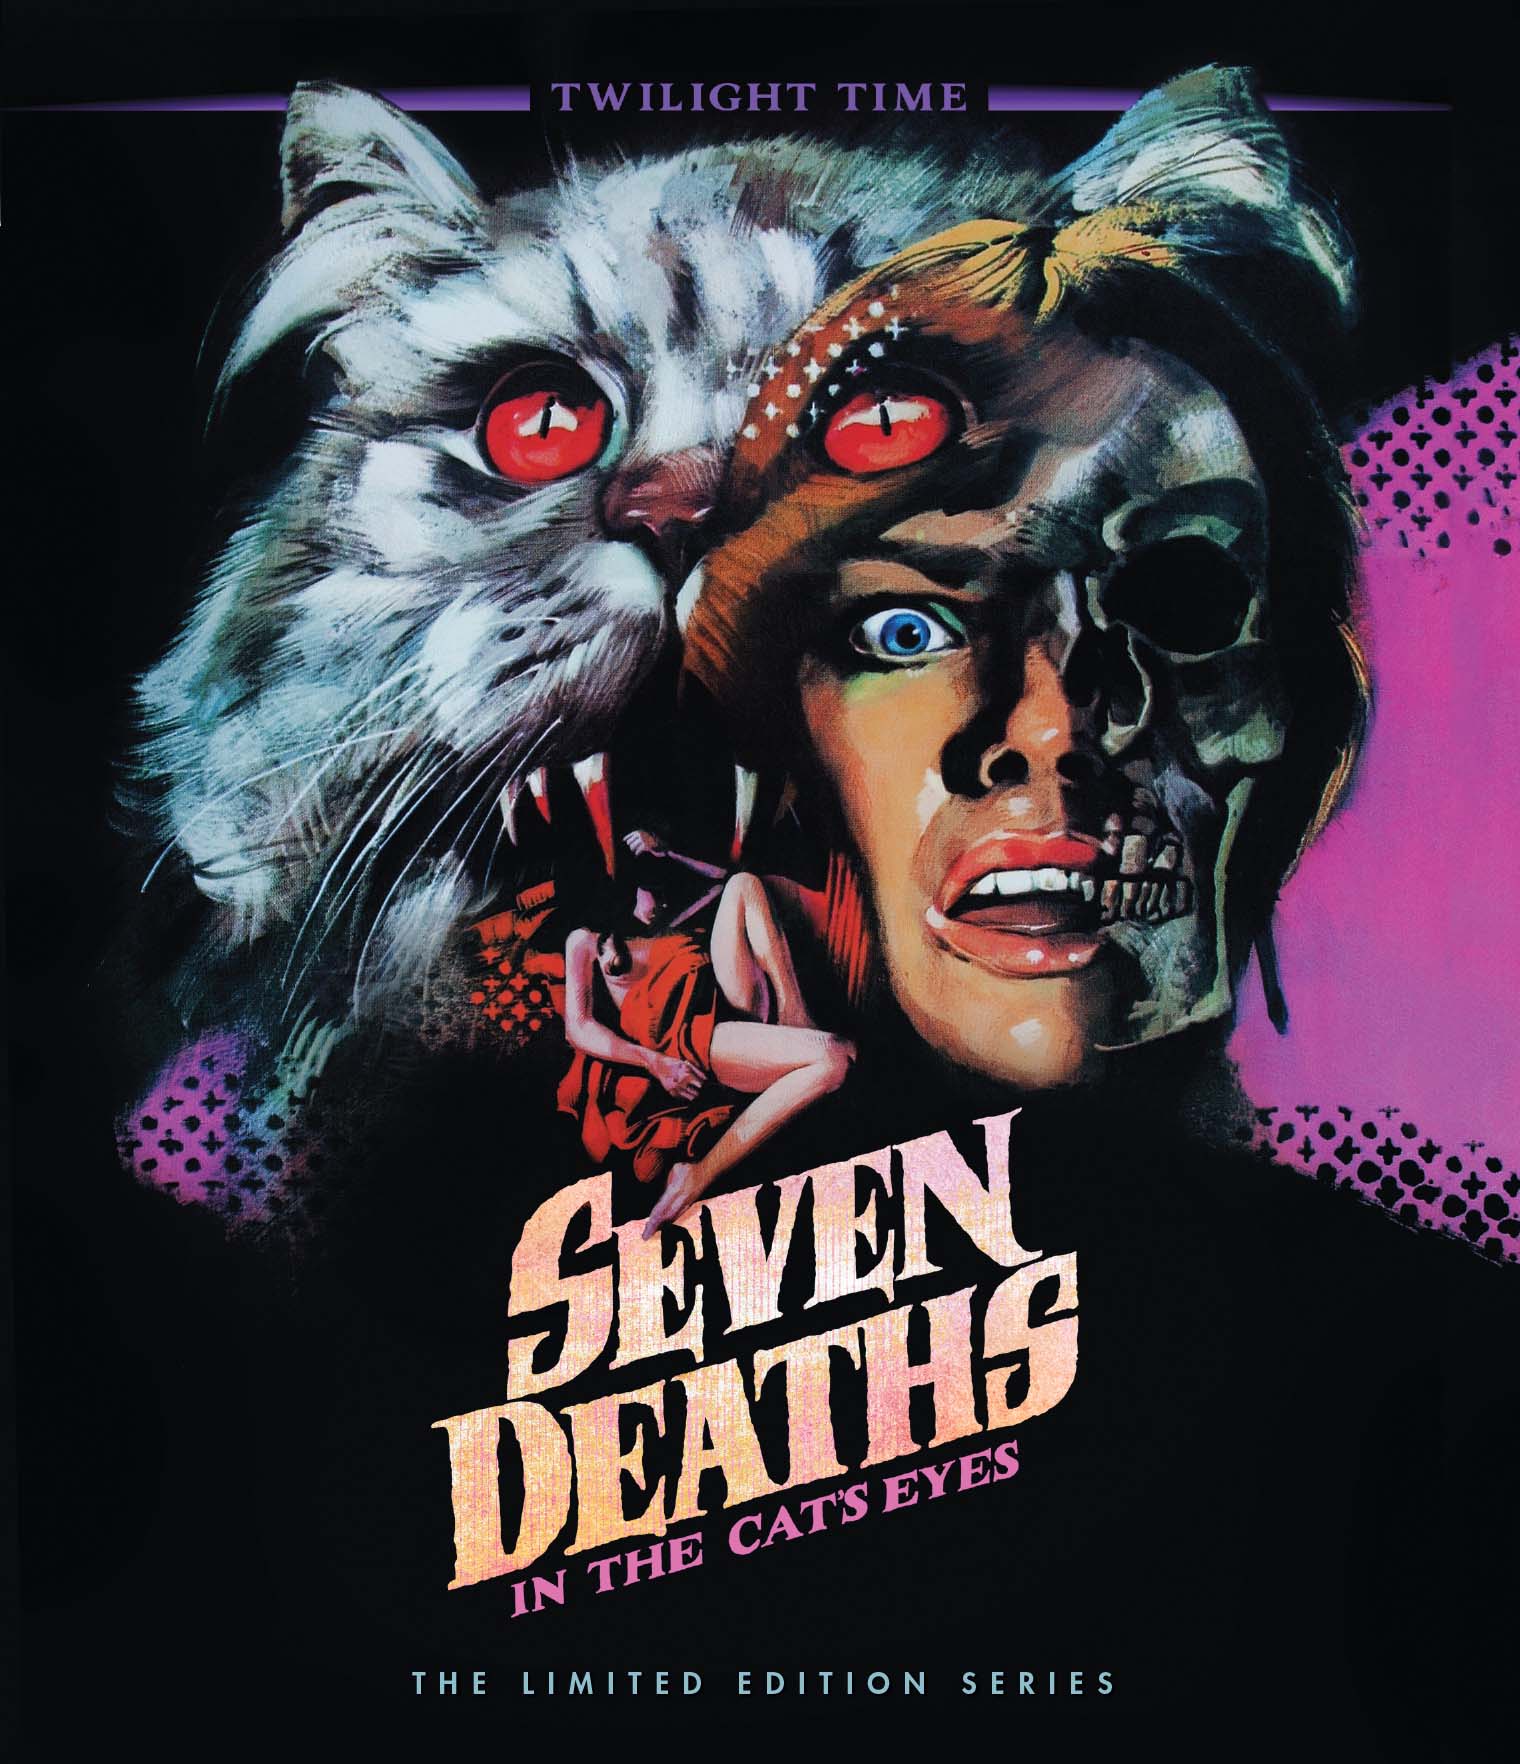 Seven Deaths In The Cats Eyes (Limited Edition) Blu-Ray Blu-Ray